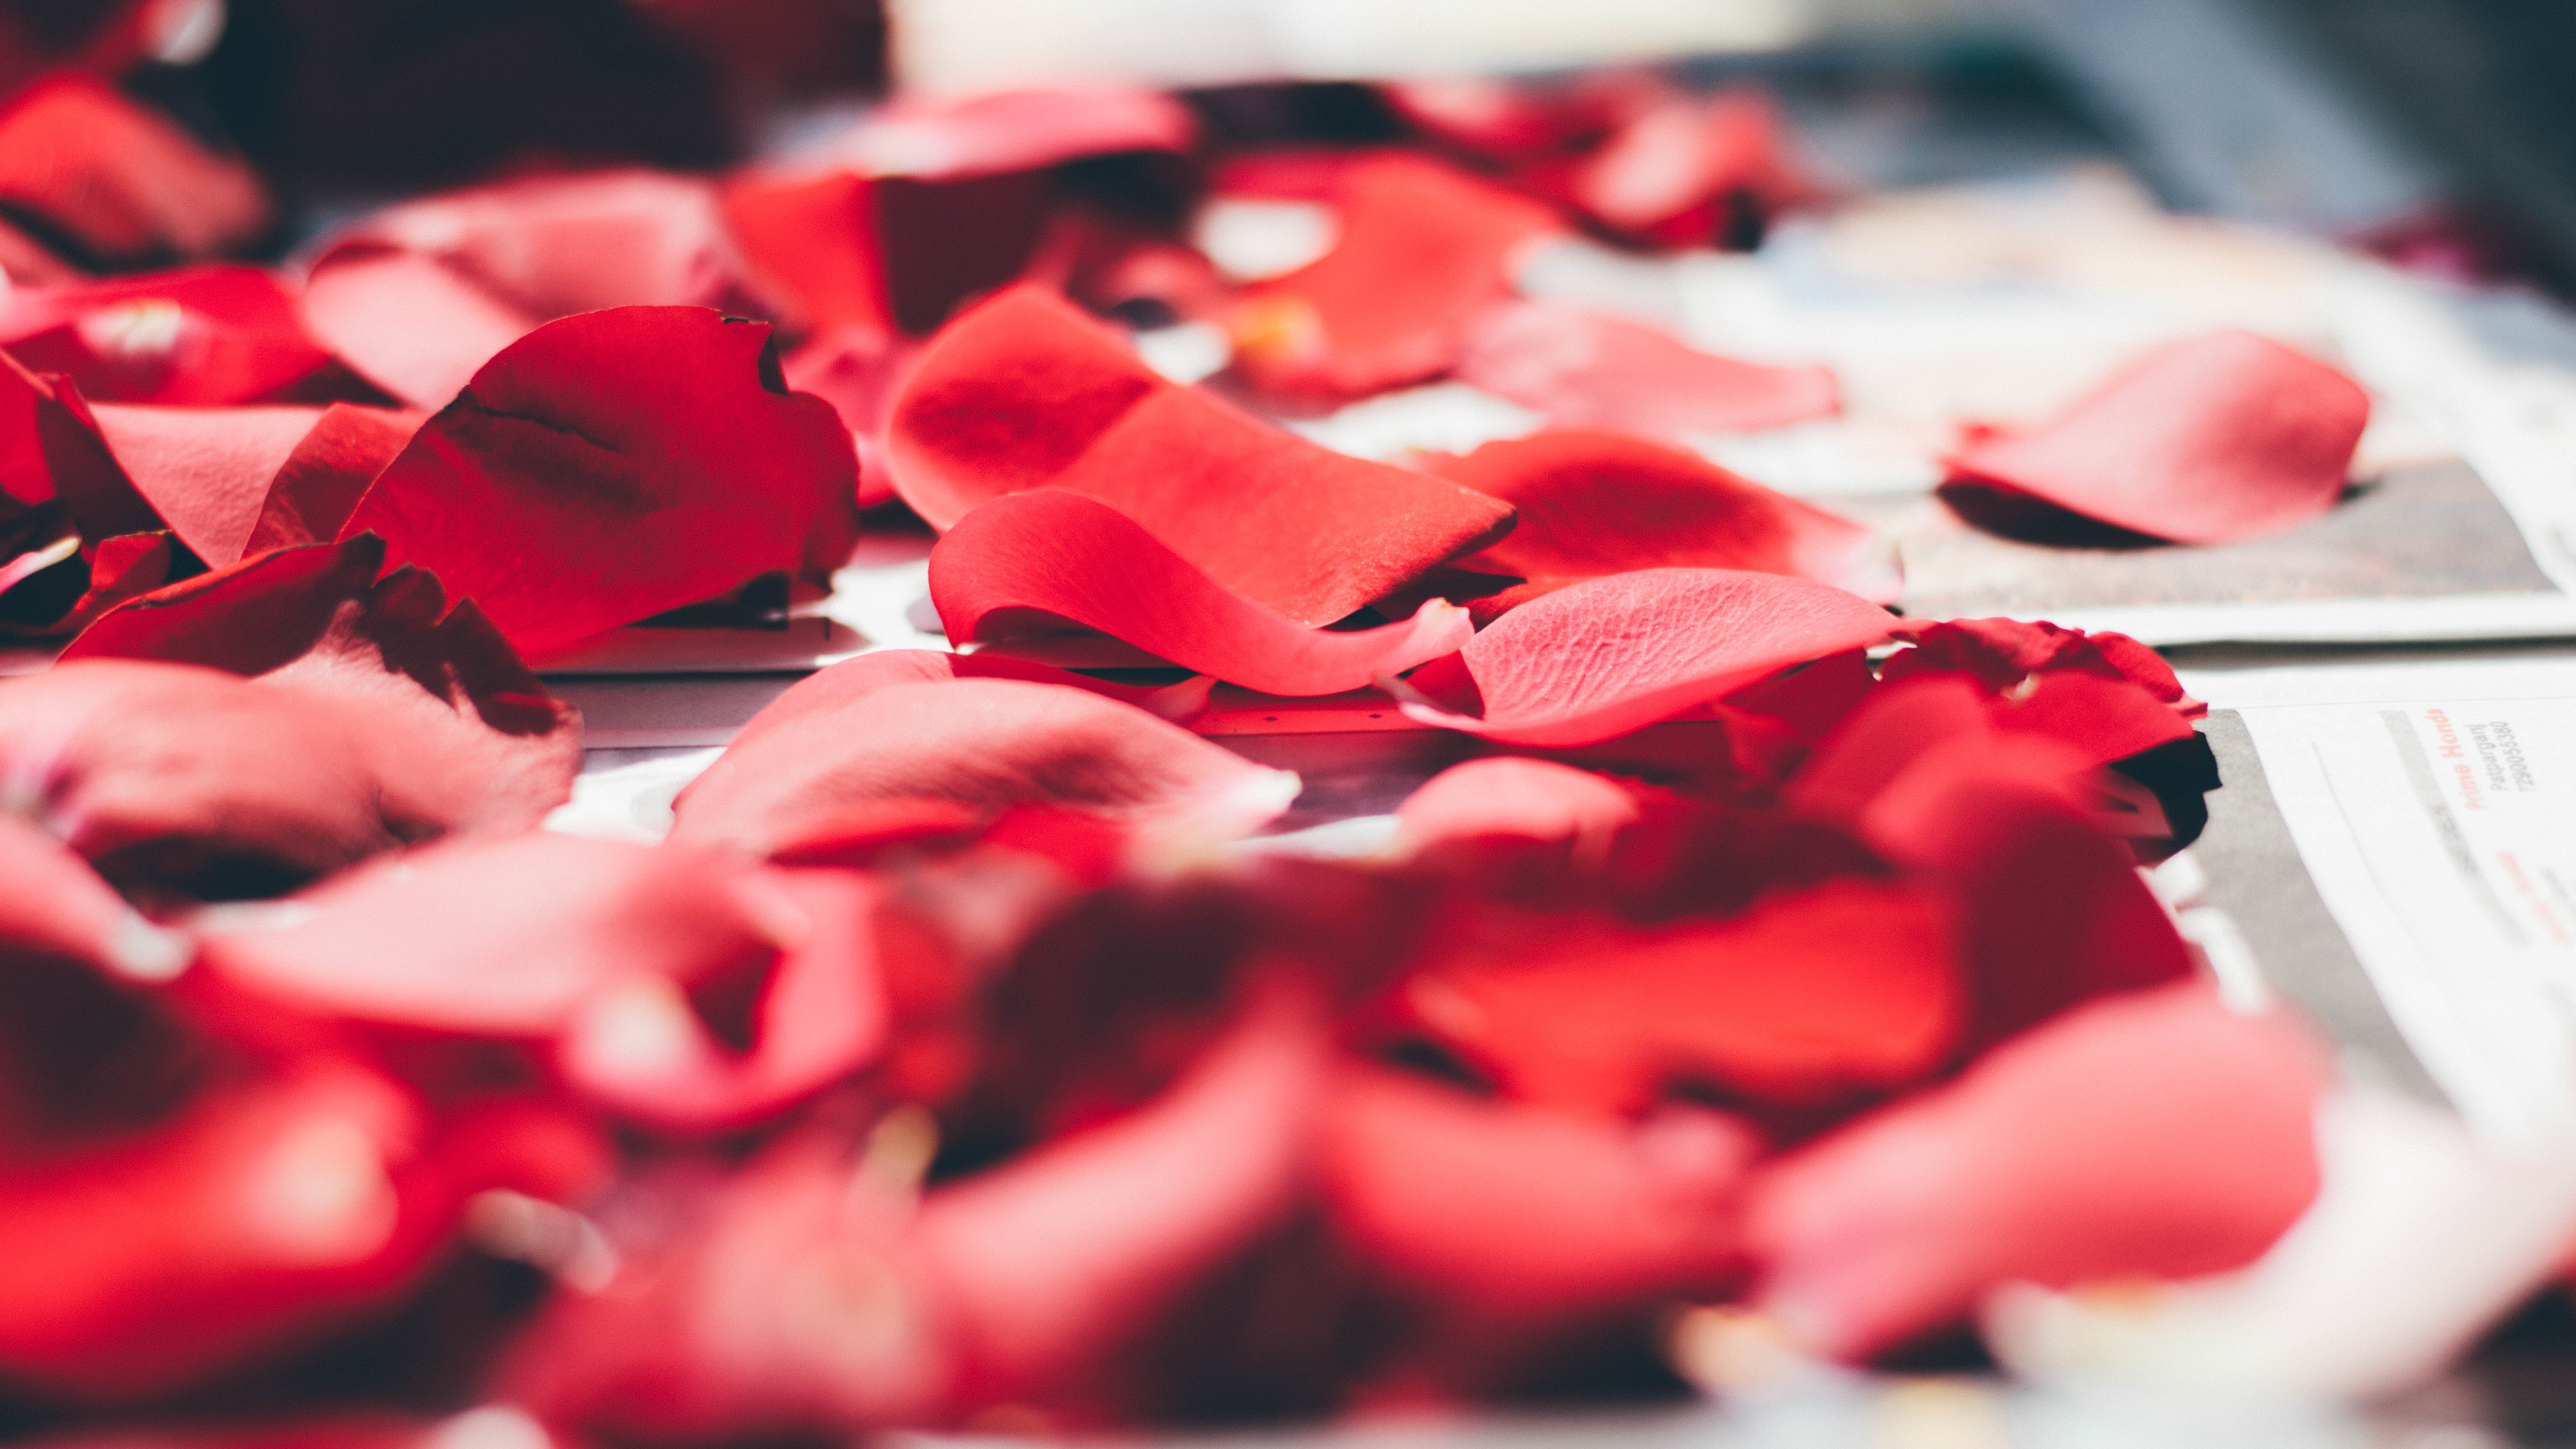 Free download wallpaper Miscellanea, Miscellaneous, Blur, Smooth, Rose Flower, Rose, Petals, Close Up on your PC desktop